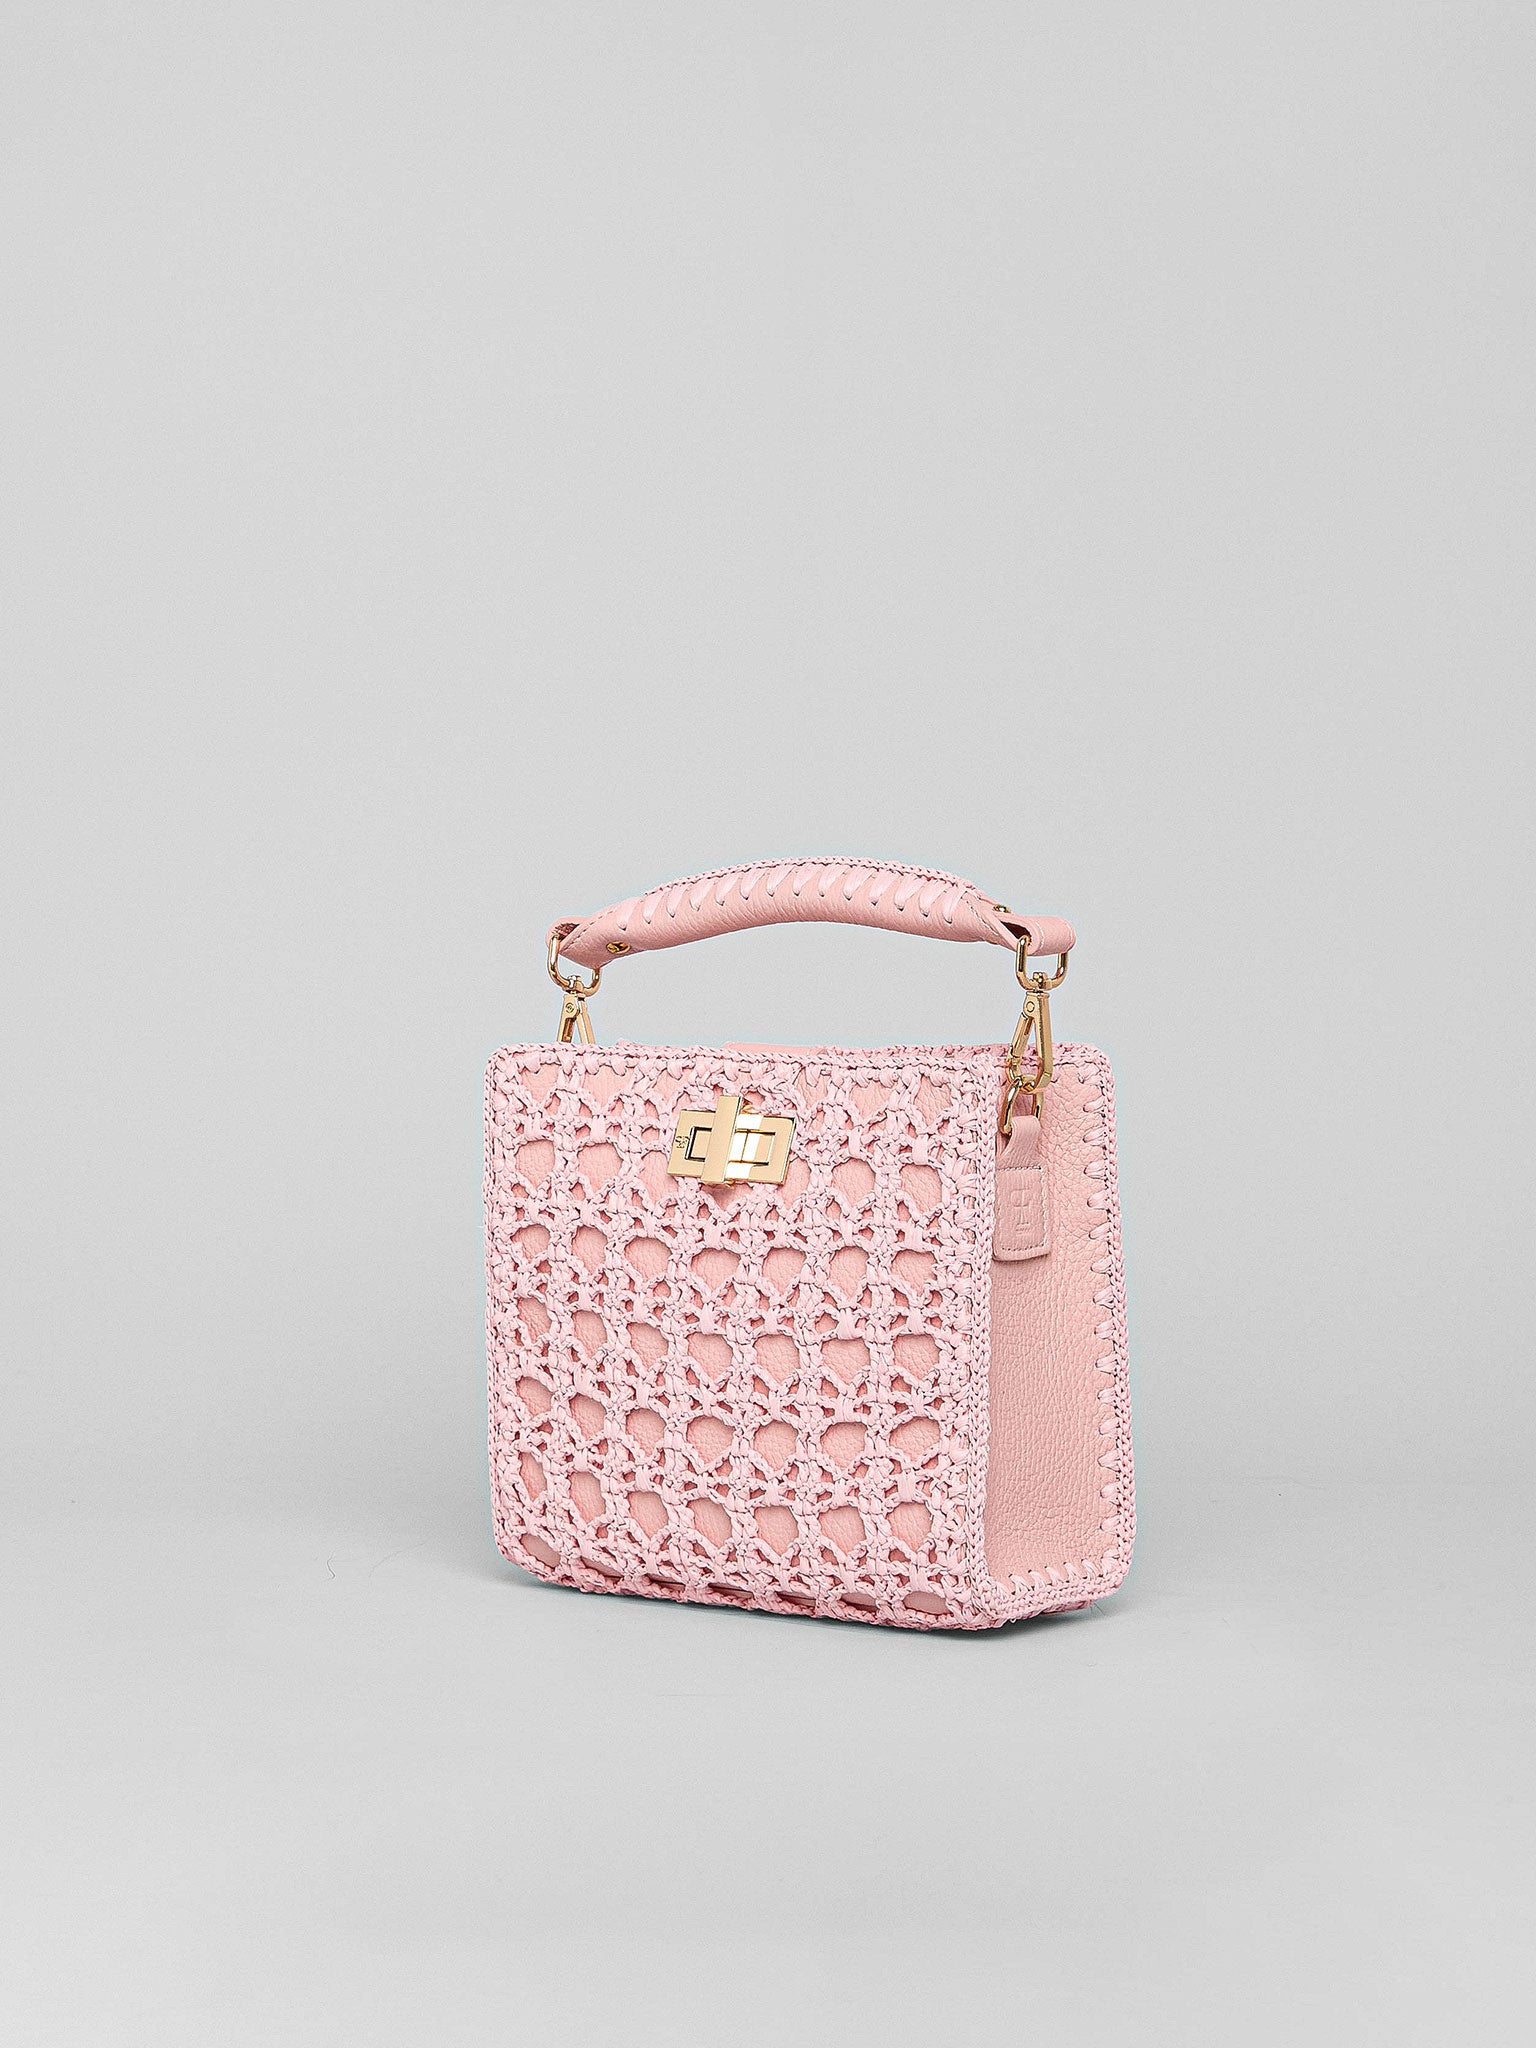 Sylvia Small Crochet Limited Edition Pink